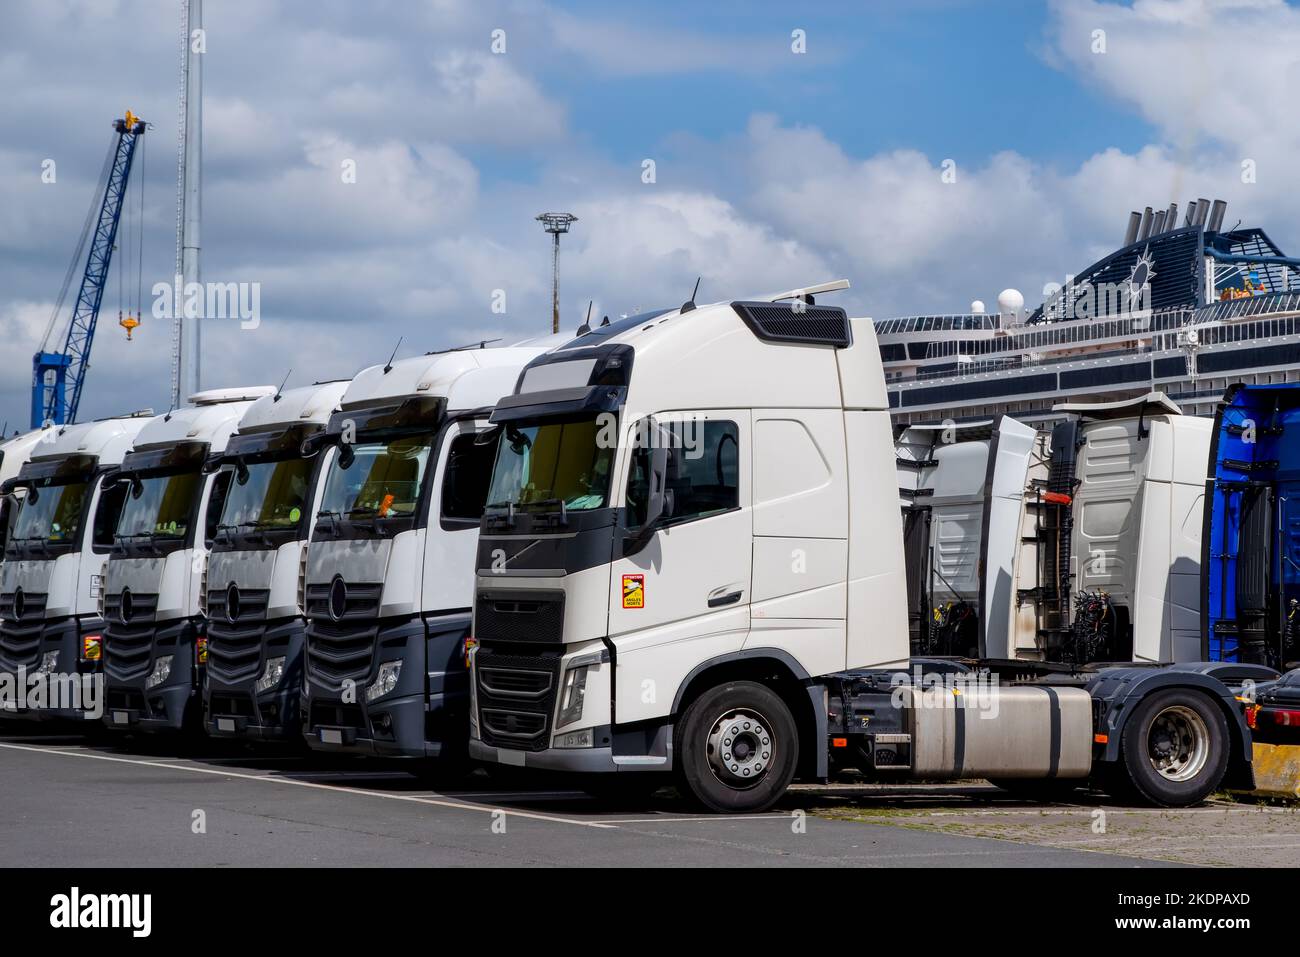 Trucks in Ostuferhafen. Ostuferhafen is the cargo and logistics center on the Kiel Fjord. There are concentrated ferry services to the Baltic States, Stock Photo